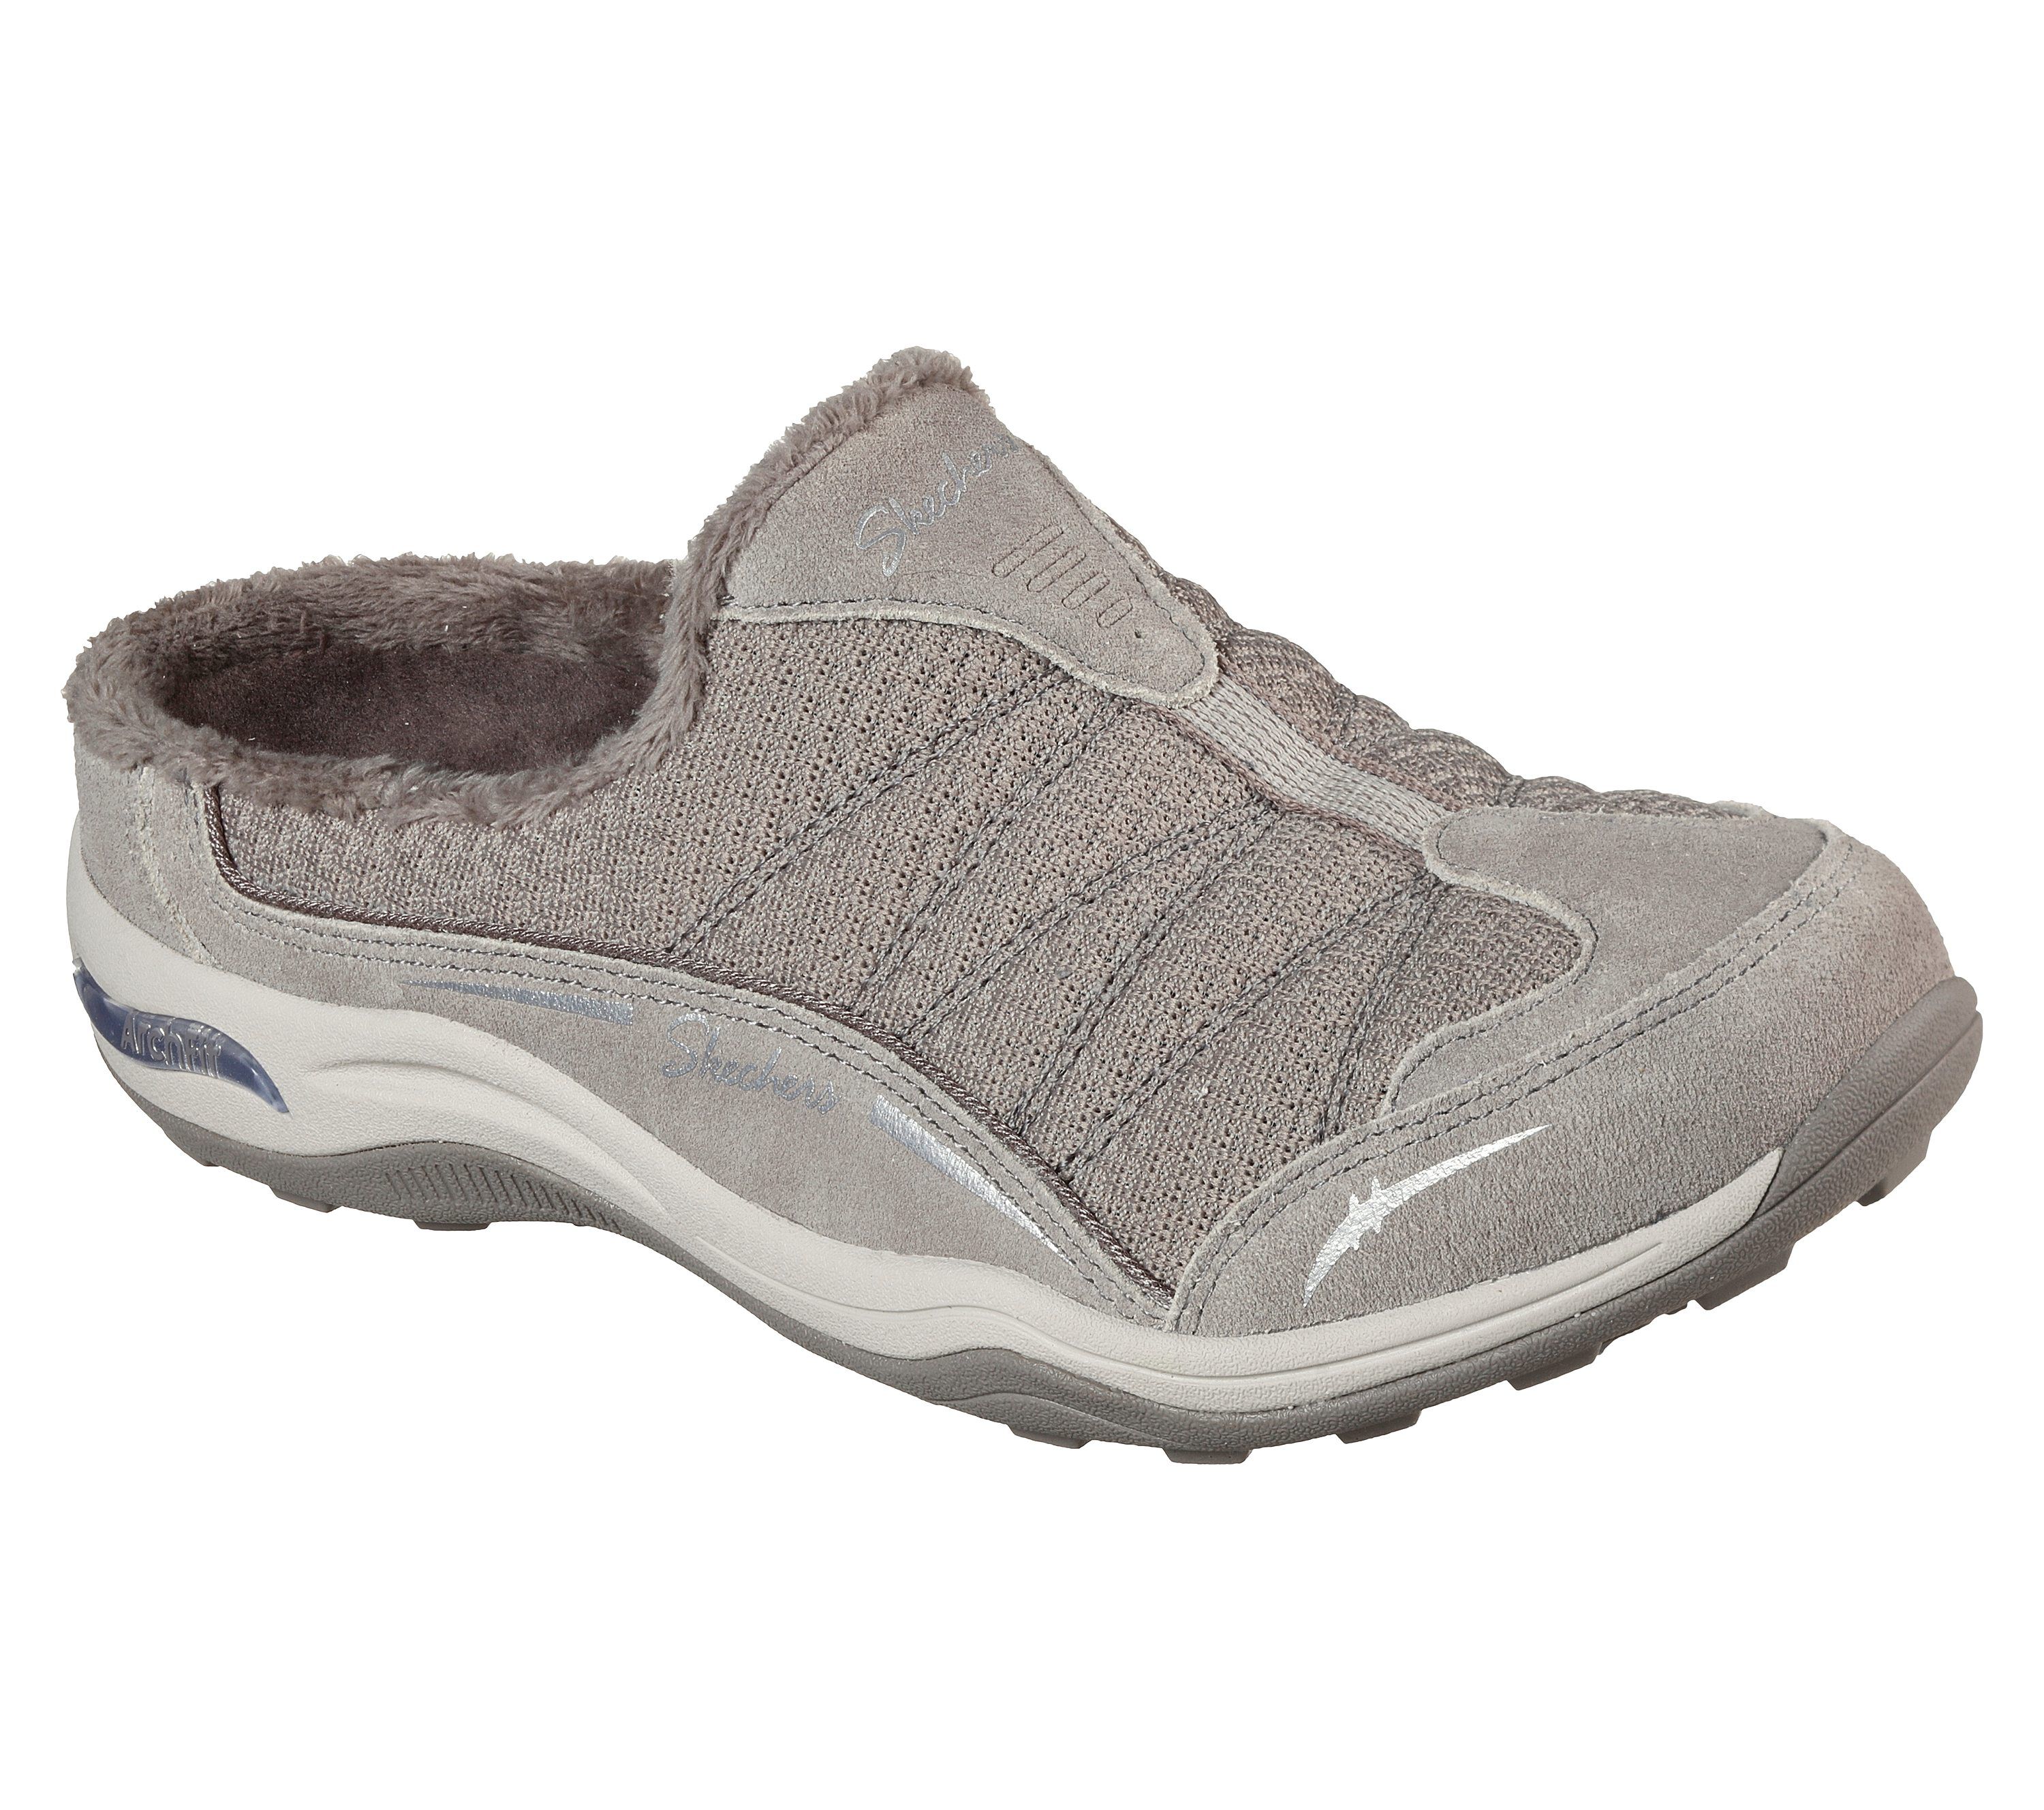 skechers relaxed fit air cooled